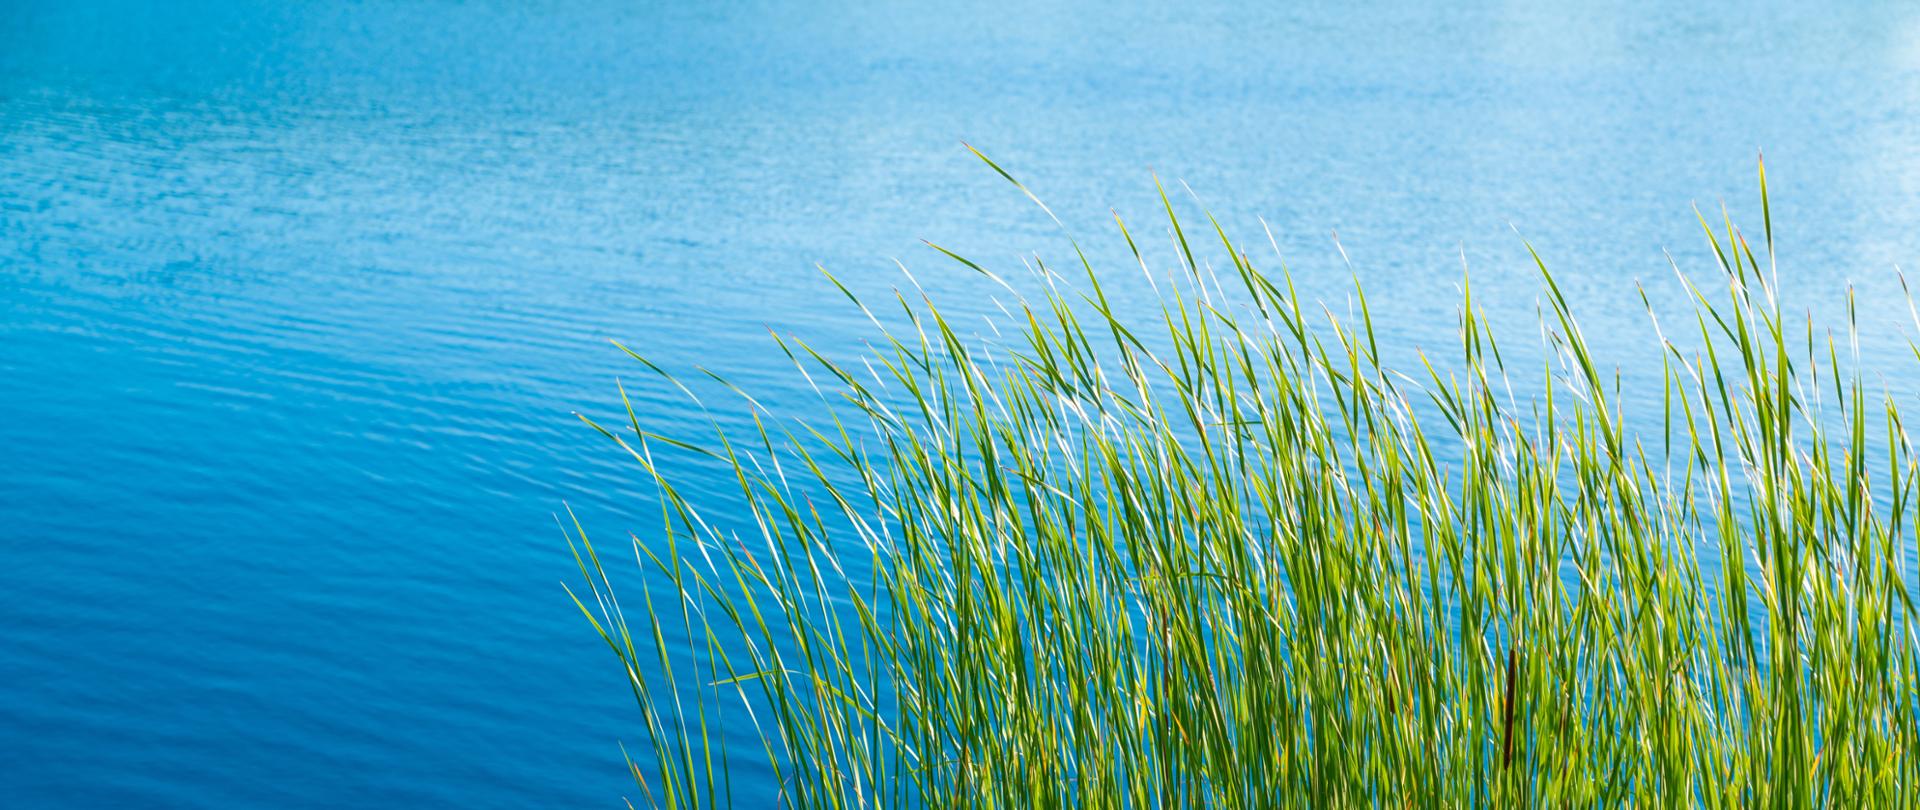 The green grass on the shore of a calm lake on a sunny day